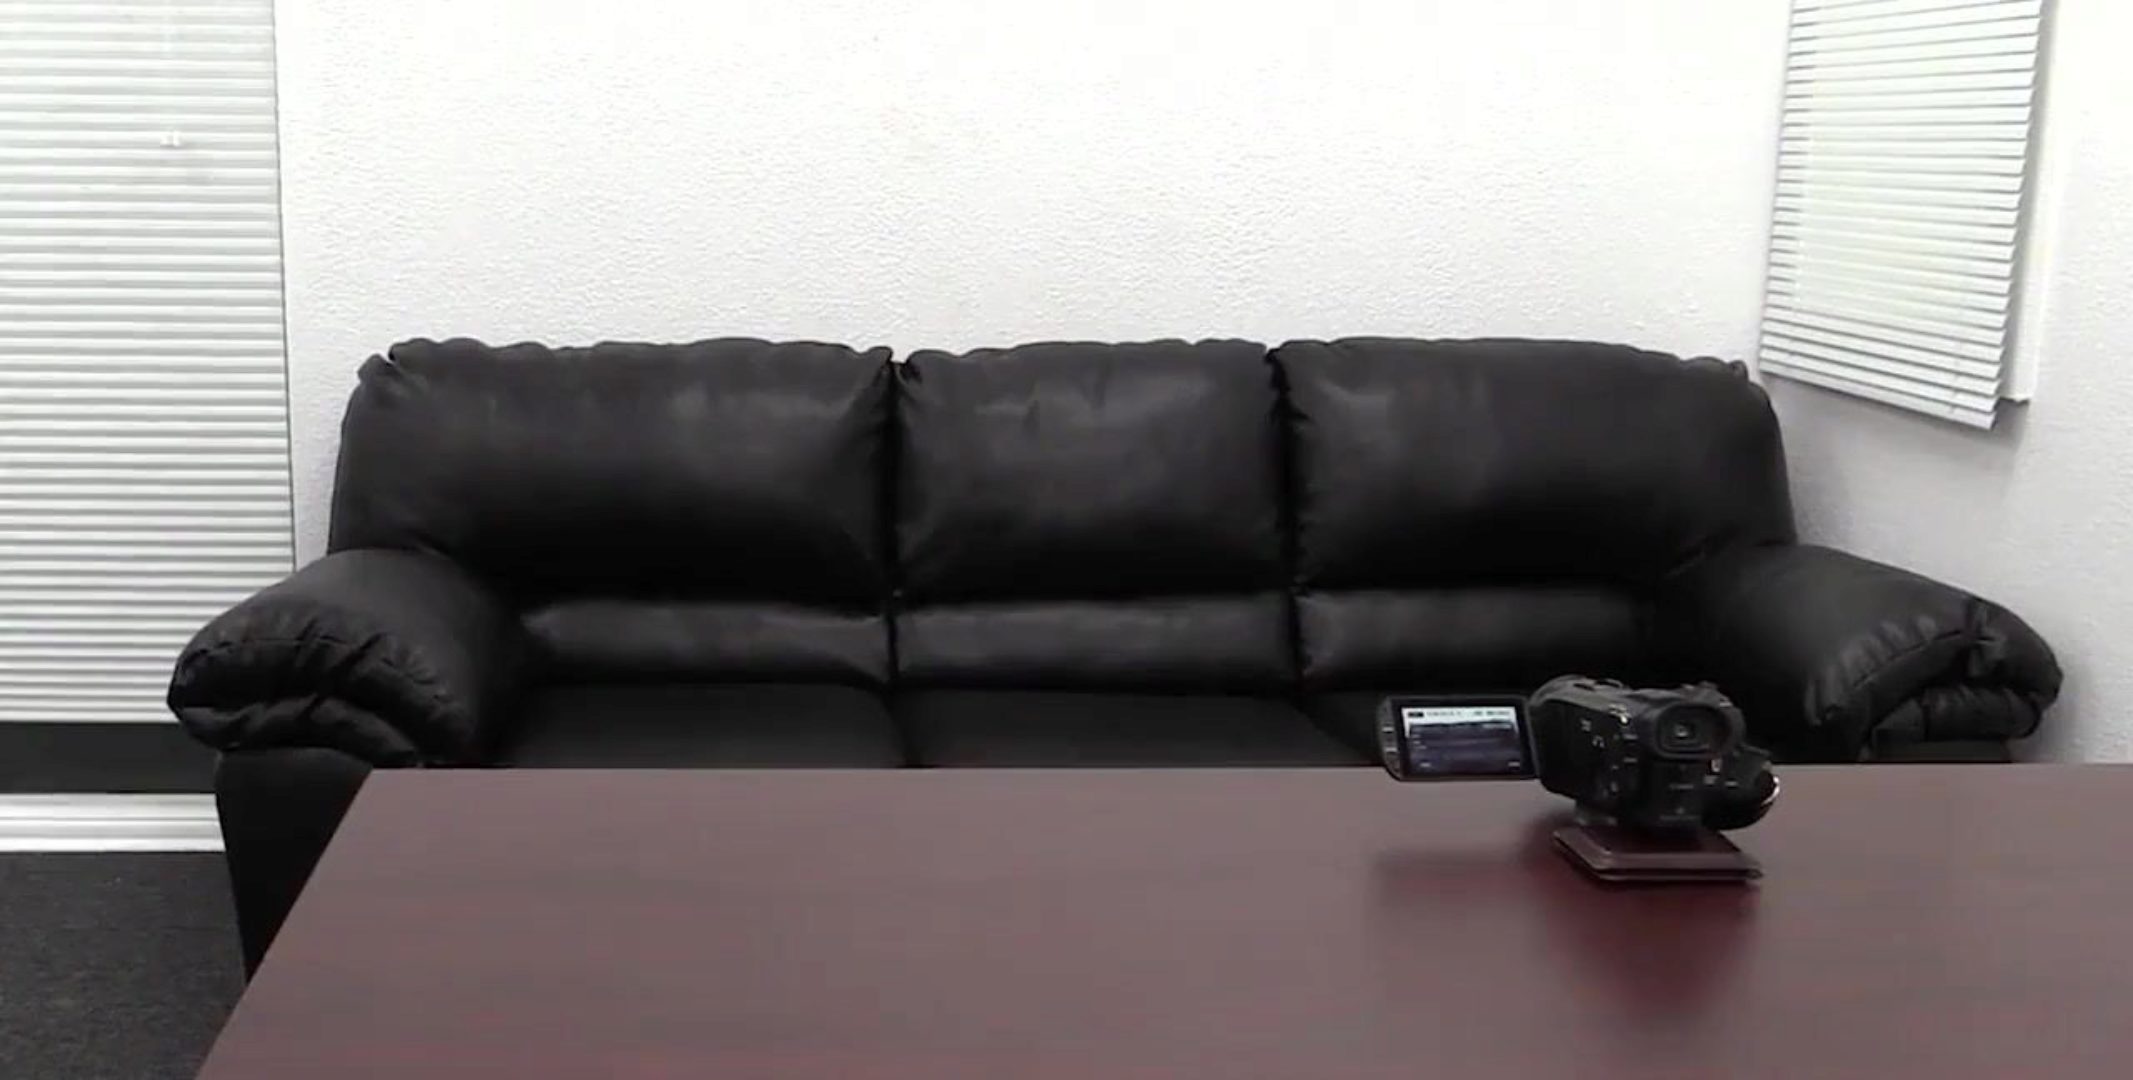 Backroom Casting Couch Anal Creampie - Tropic Tube